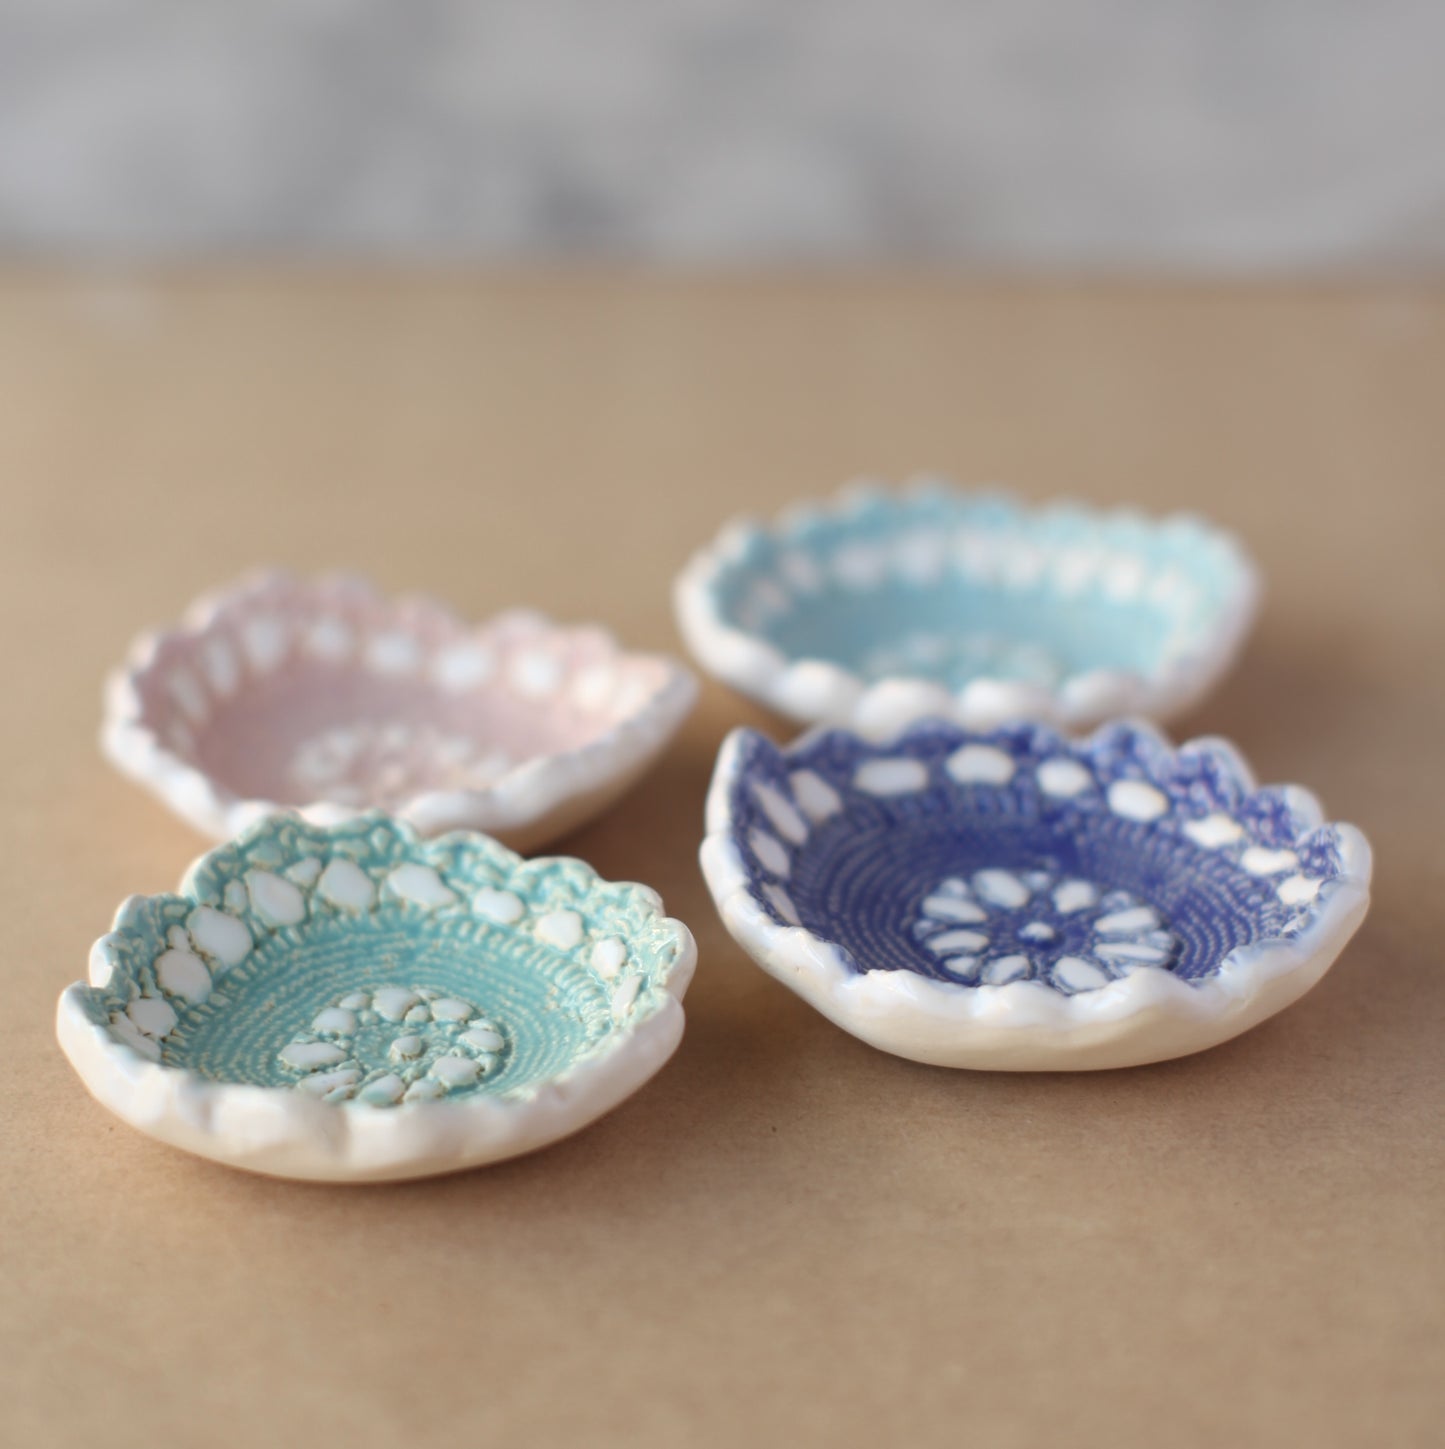 Pottery Workshop - Pressed Lace Dishes and Platters - Sign up to register interest